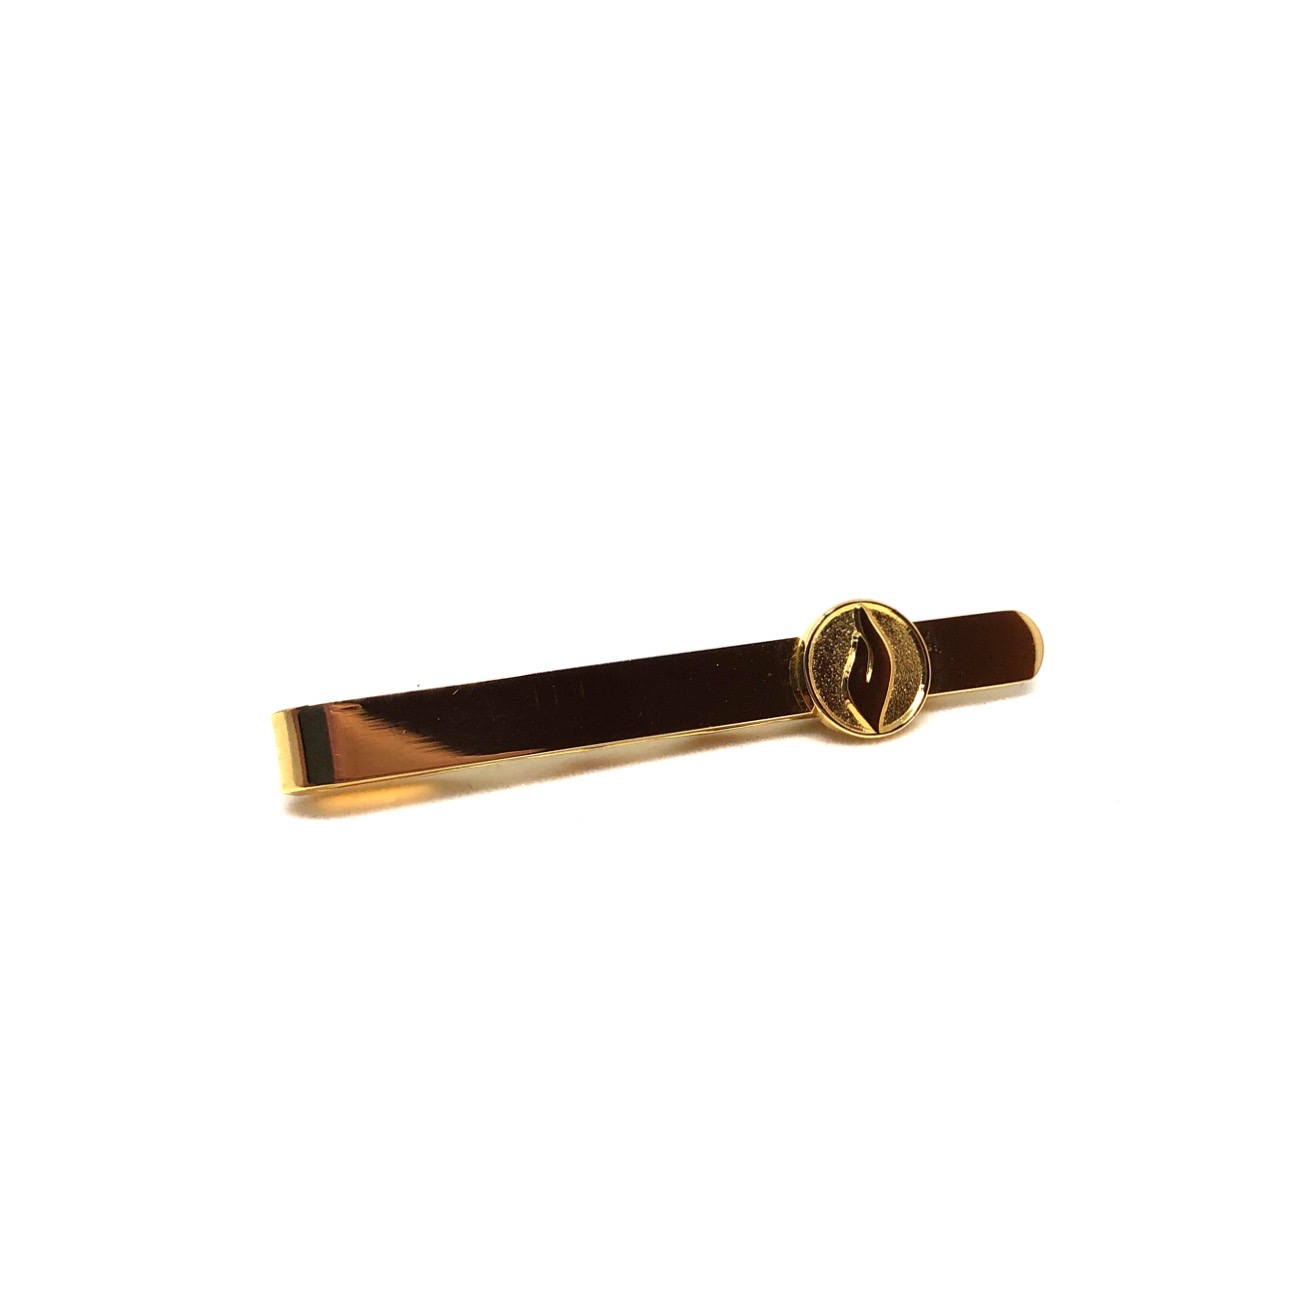 Tie pin Police gilded